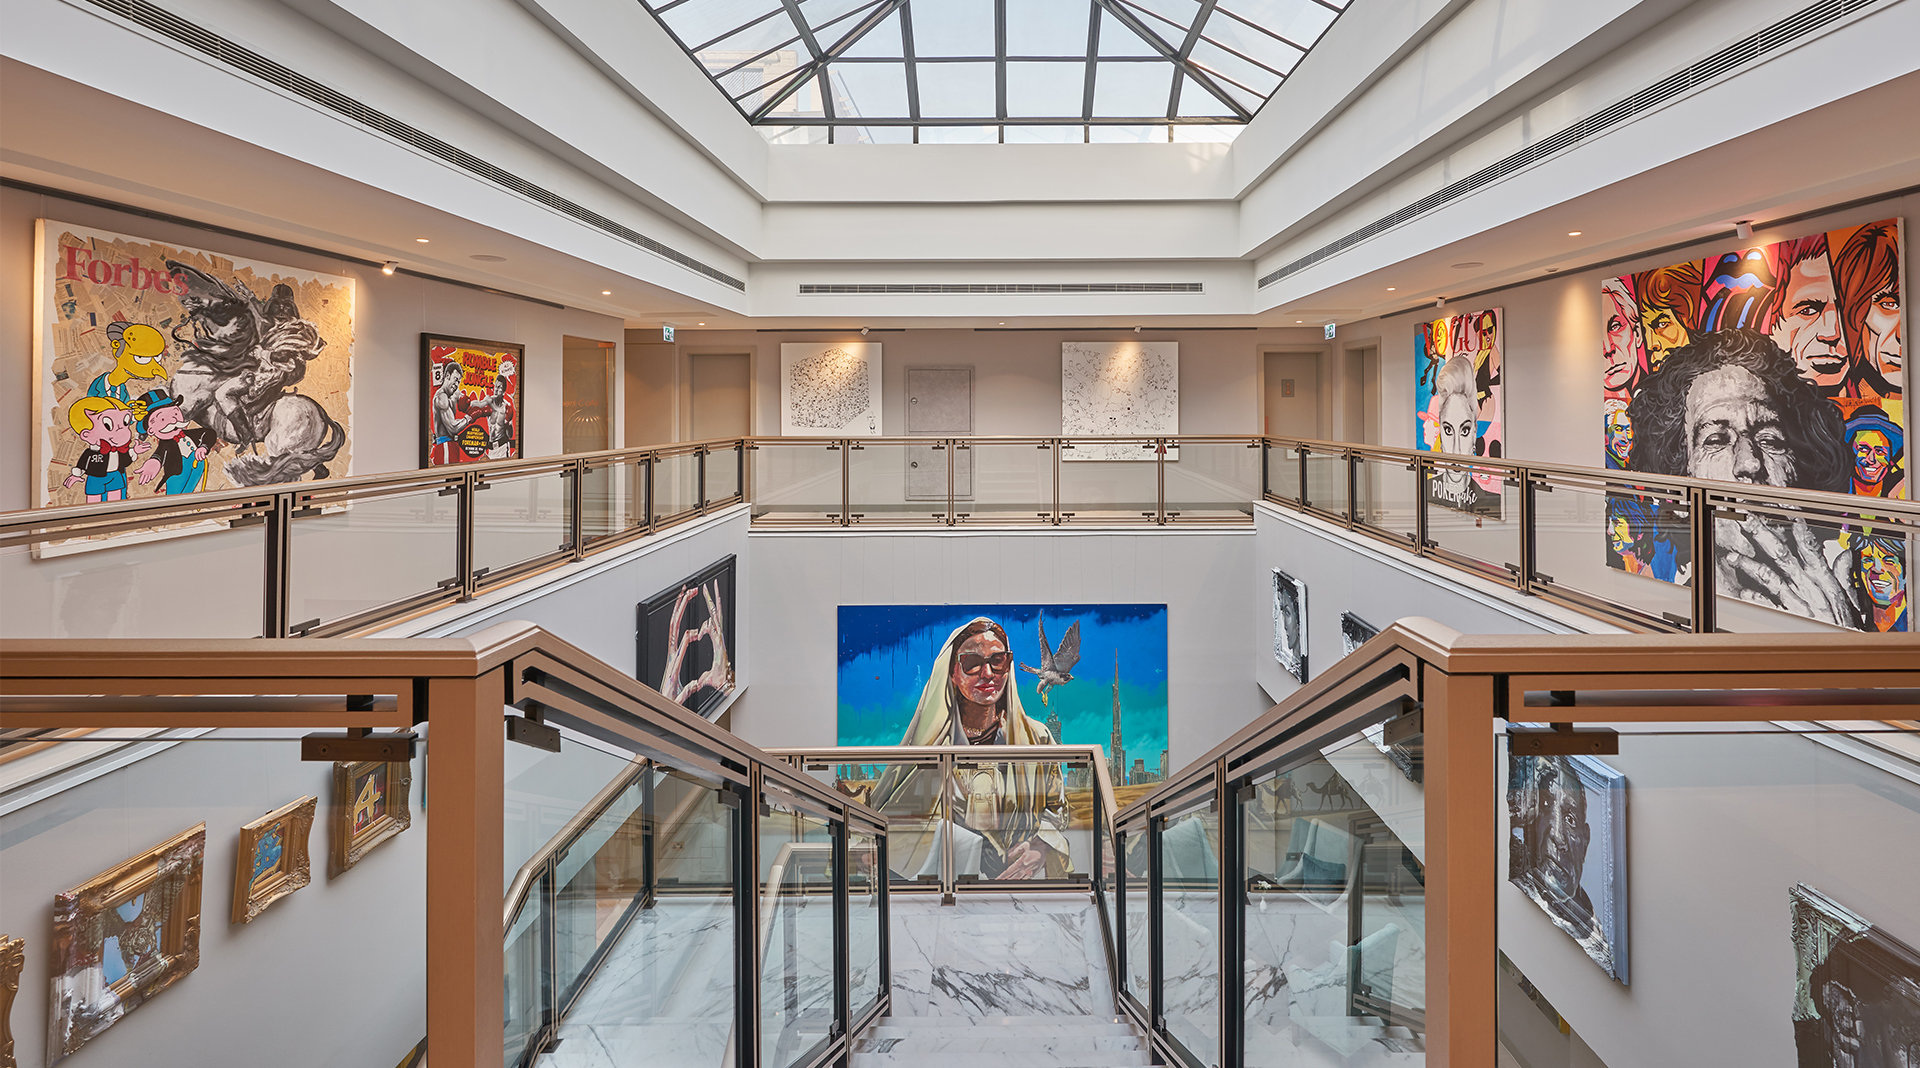 Interior atrium and stairs at a modern art gallery delivered by ISG Construction Ltd